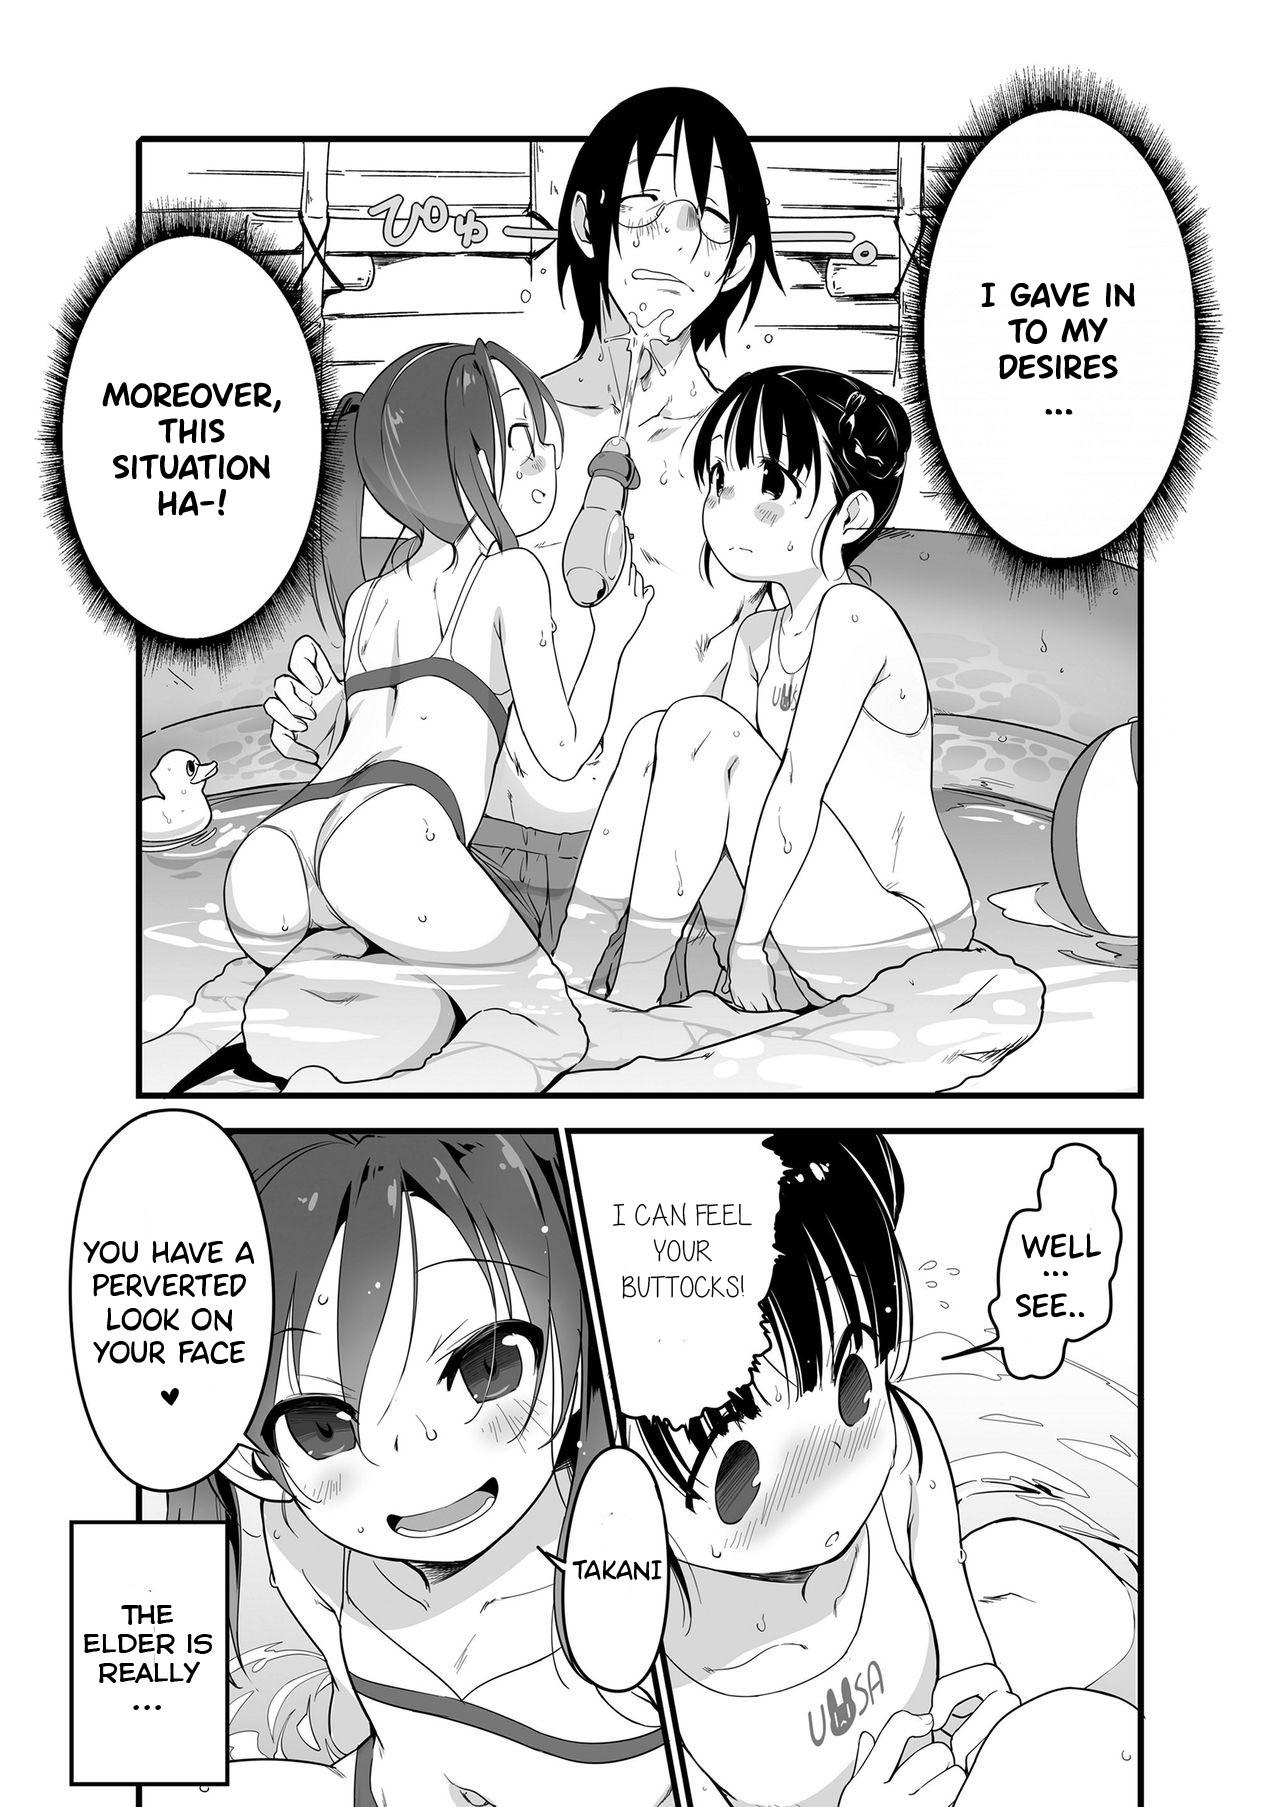 Spoon Uchiage Hanabi, Ane to Miruka? Imouto to Miruka? | Fireworks, Should we see it with the elder sister or the younger sister? Teacher - Page 6